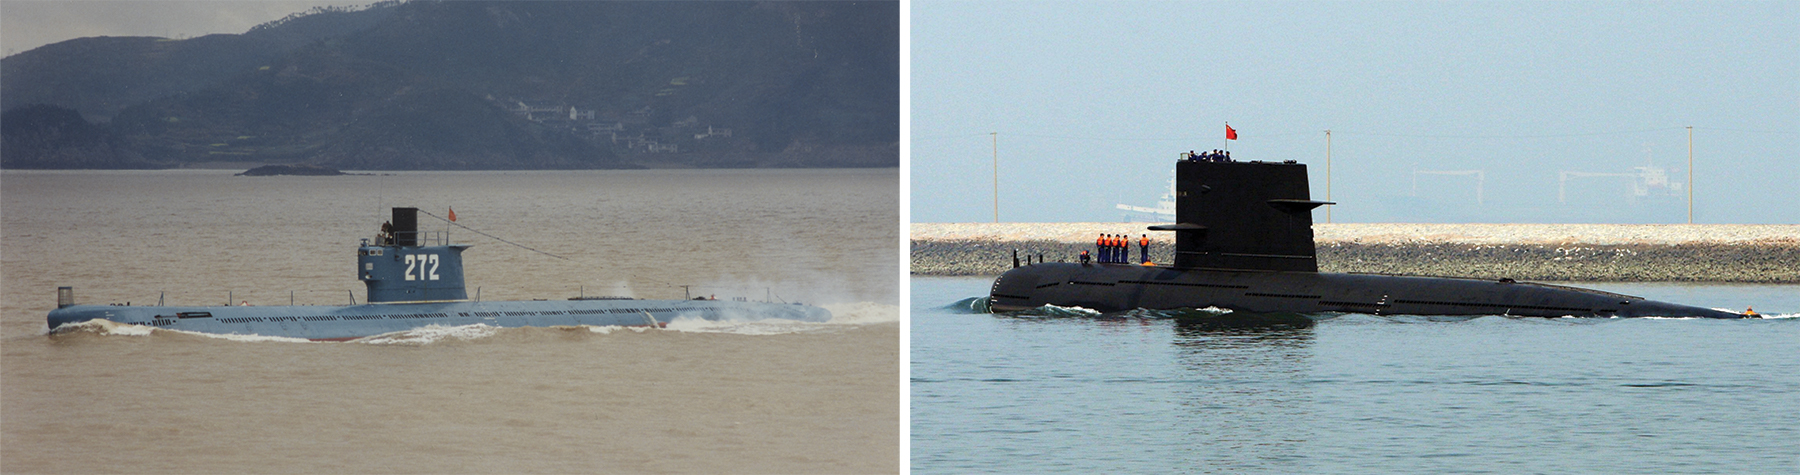 A Romeo-class and a Song-class submarine, side-by-side